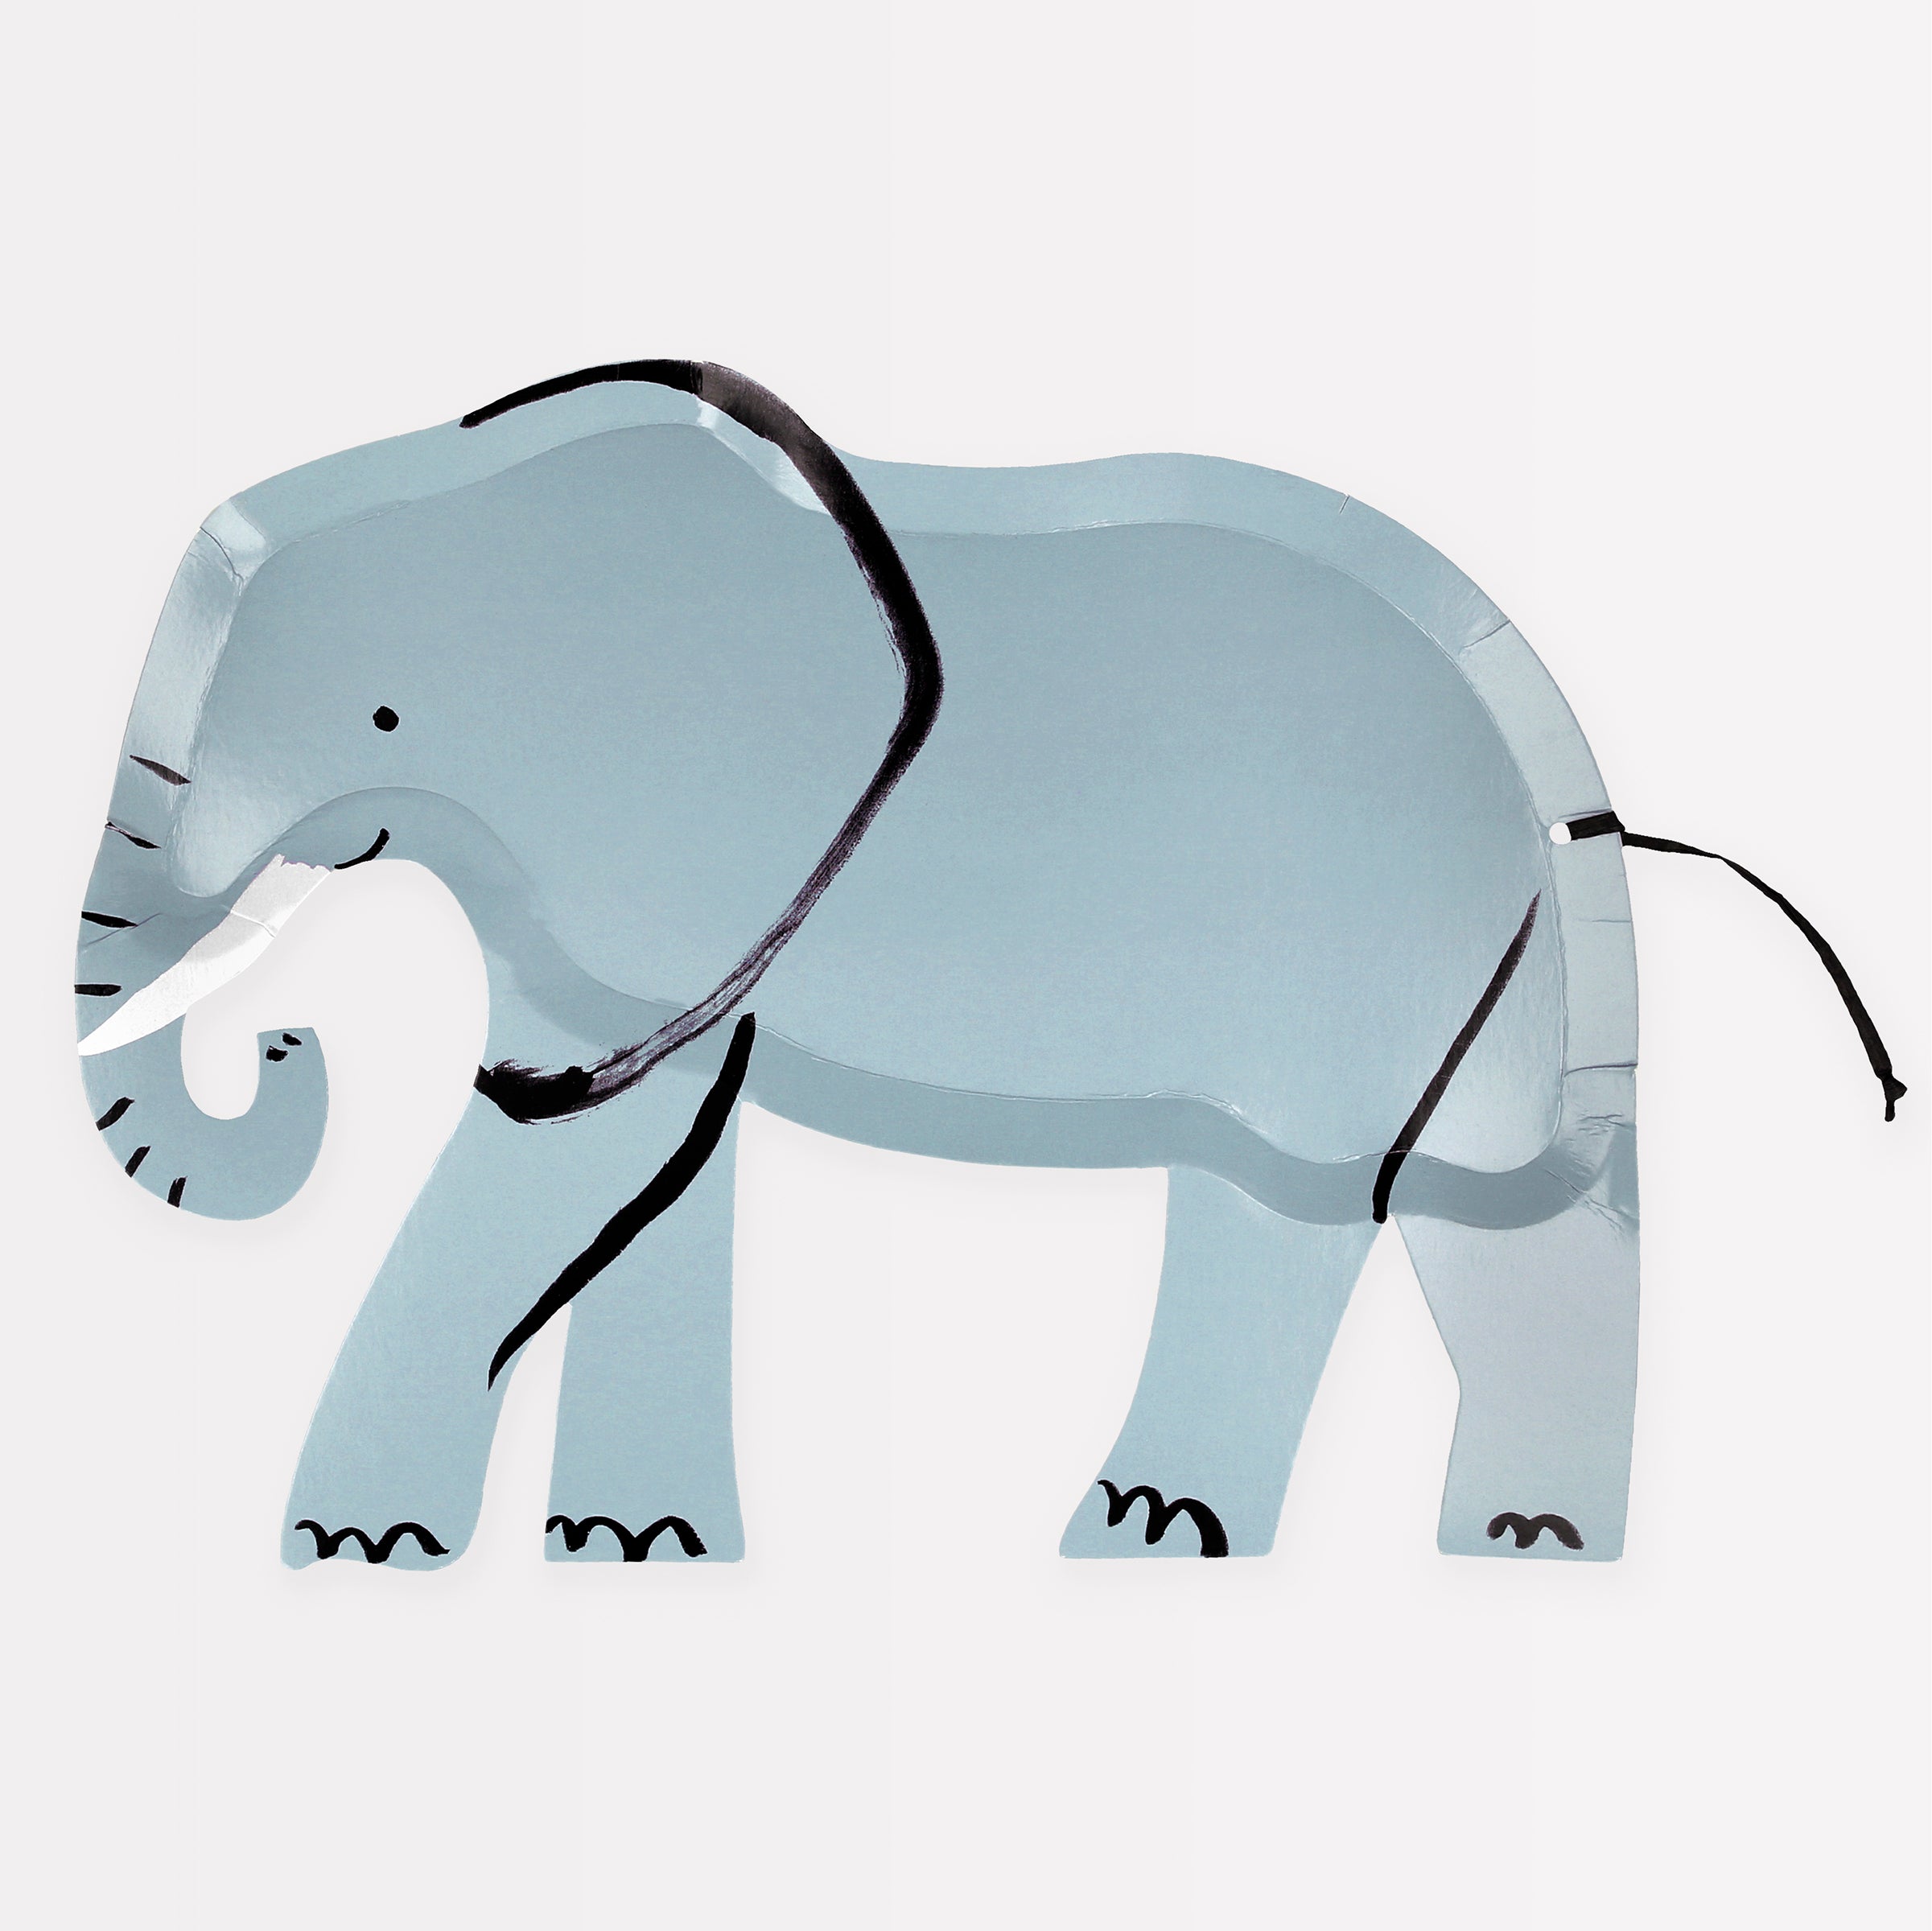 Our paper party plates, in the shape of an elephant, are ideal for a safari birthday party.